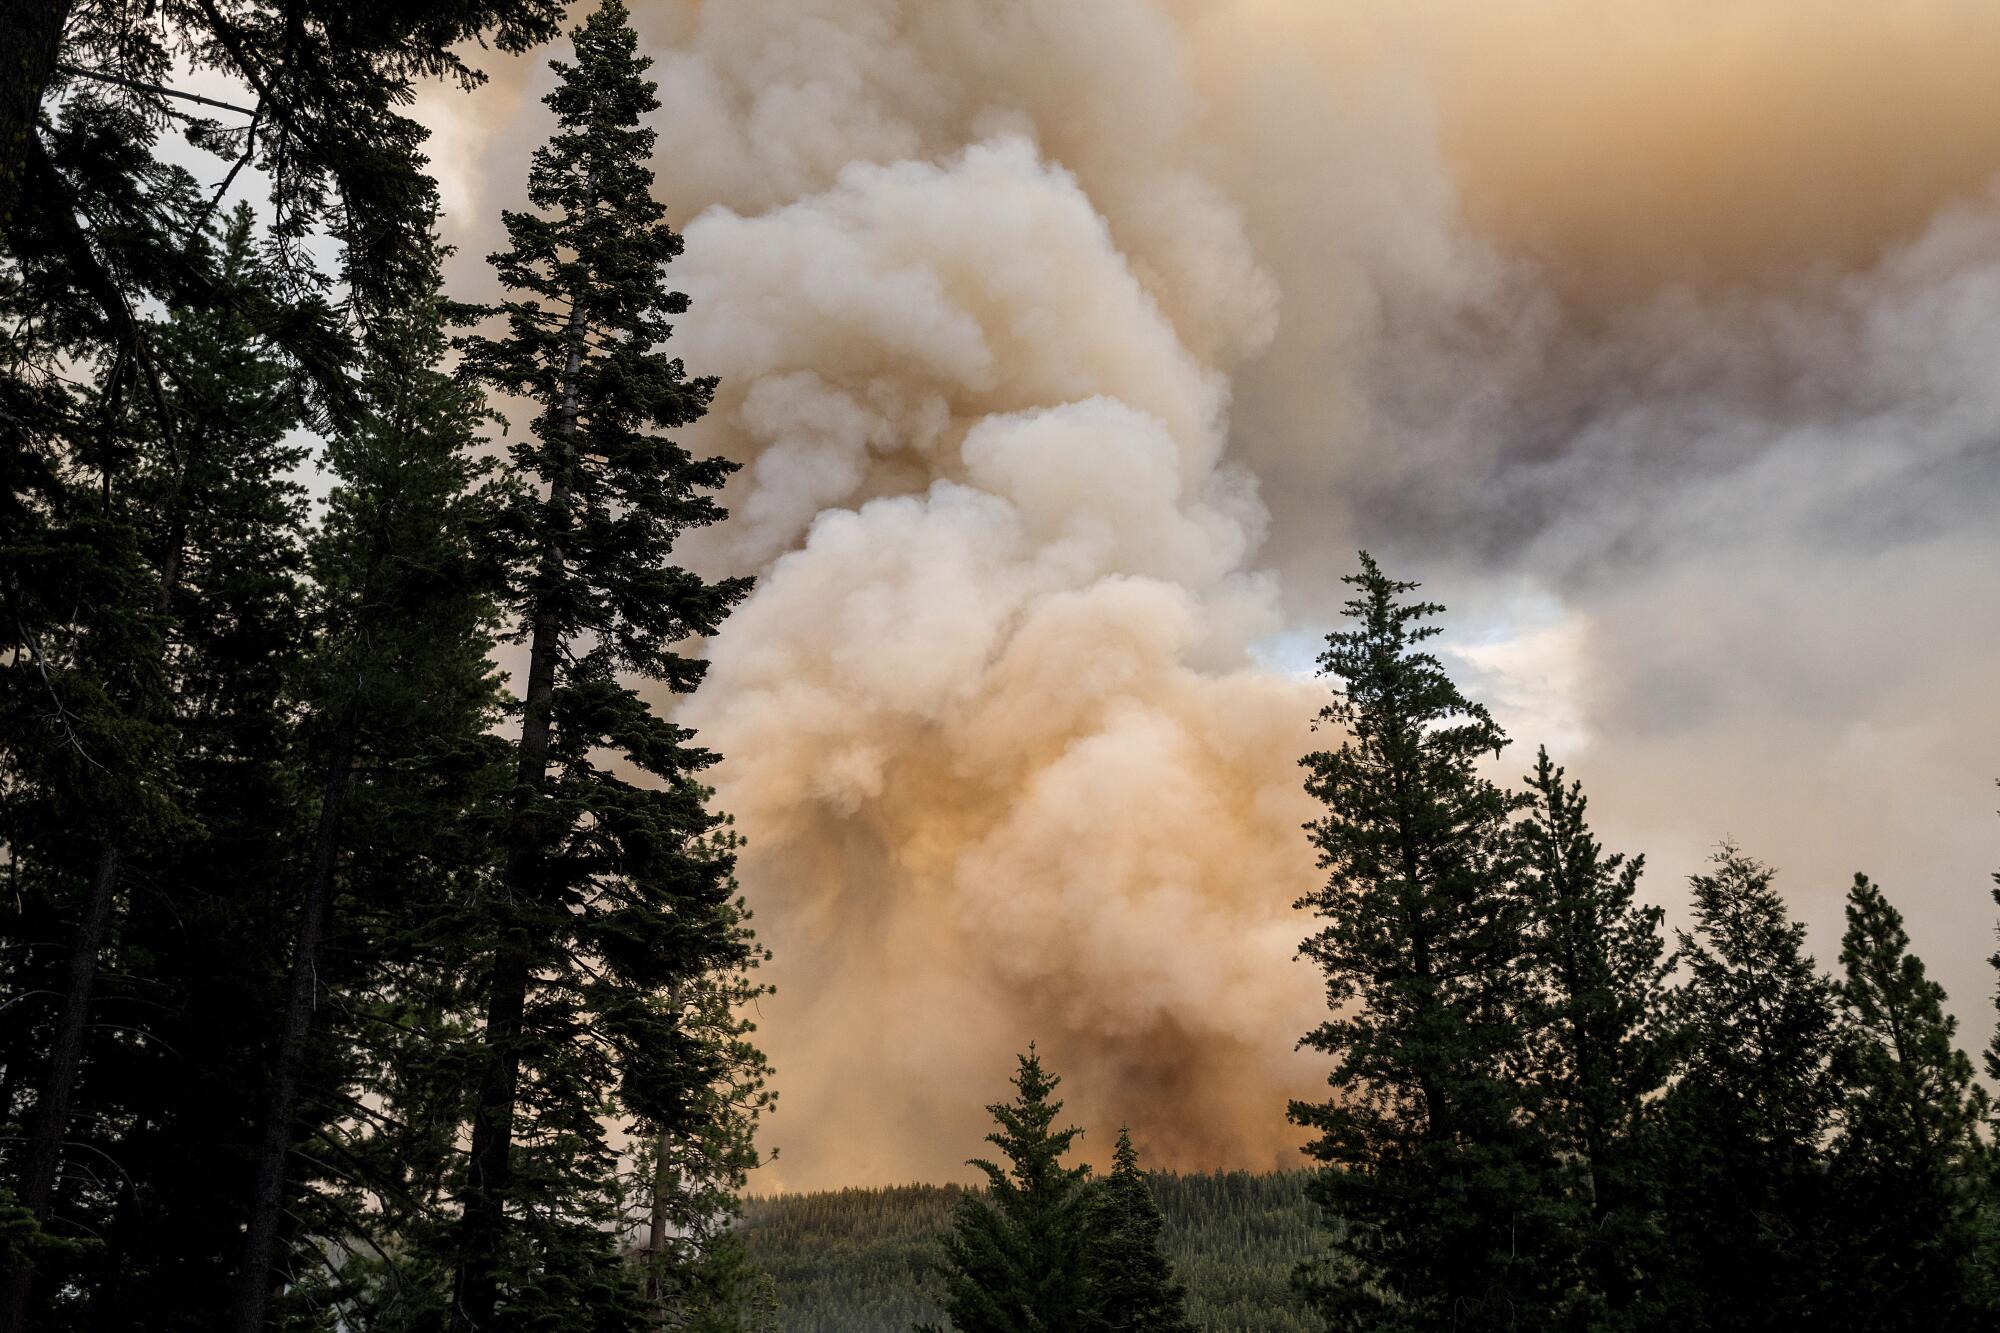 The Dixie fire burns amid billowing smoke and green trees